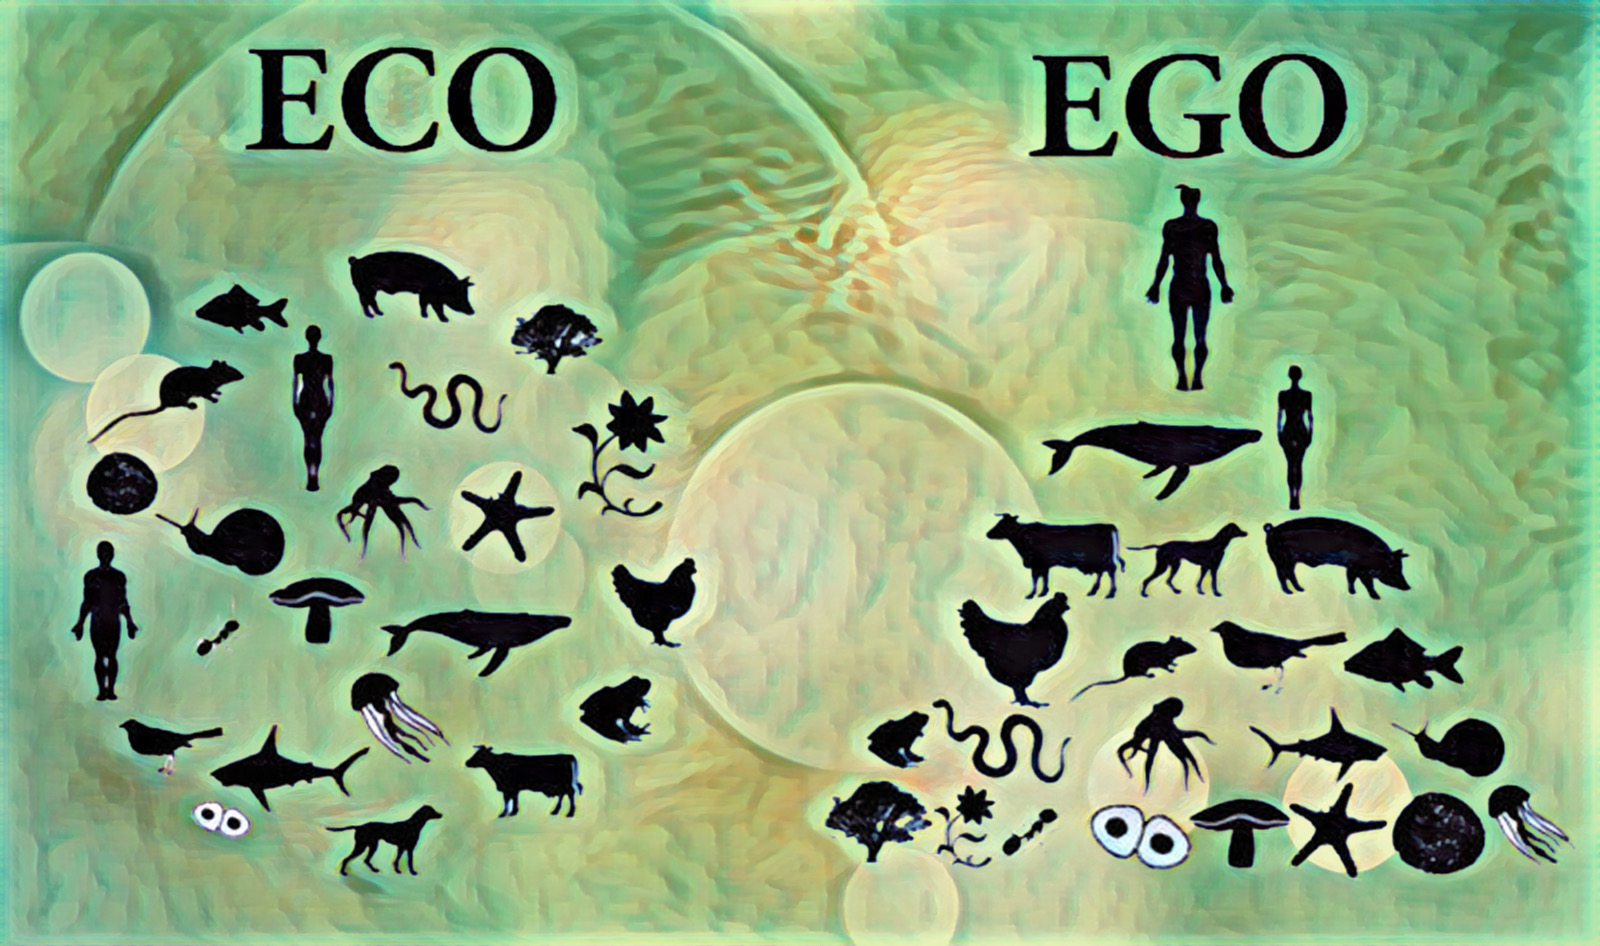 eco over eco animal rights vegan sustainable